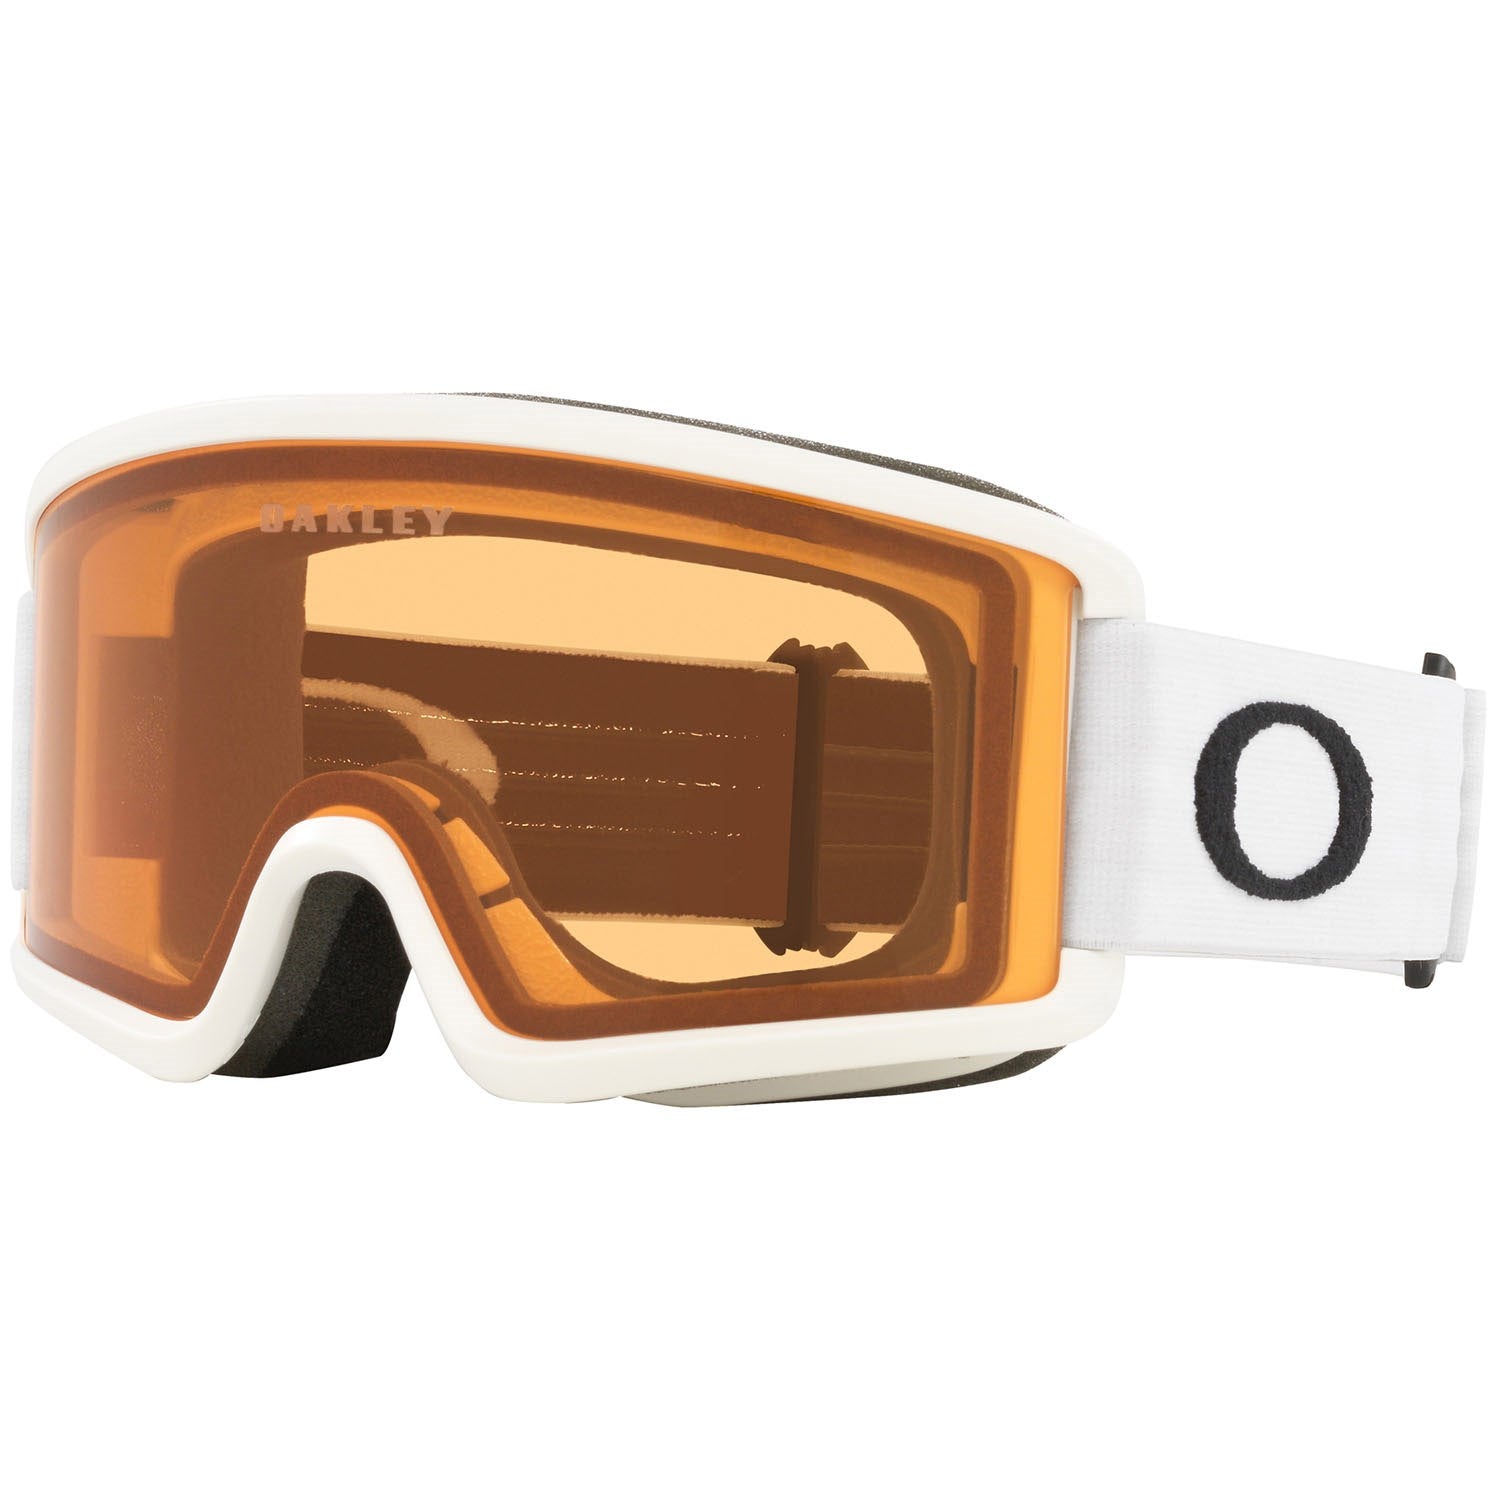 Oakley Target Line S Goggles